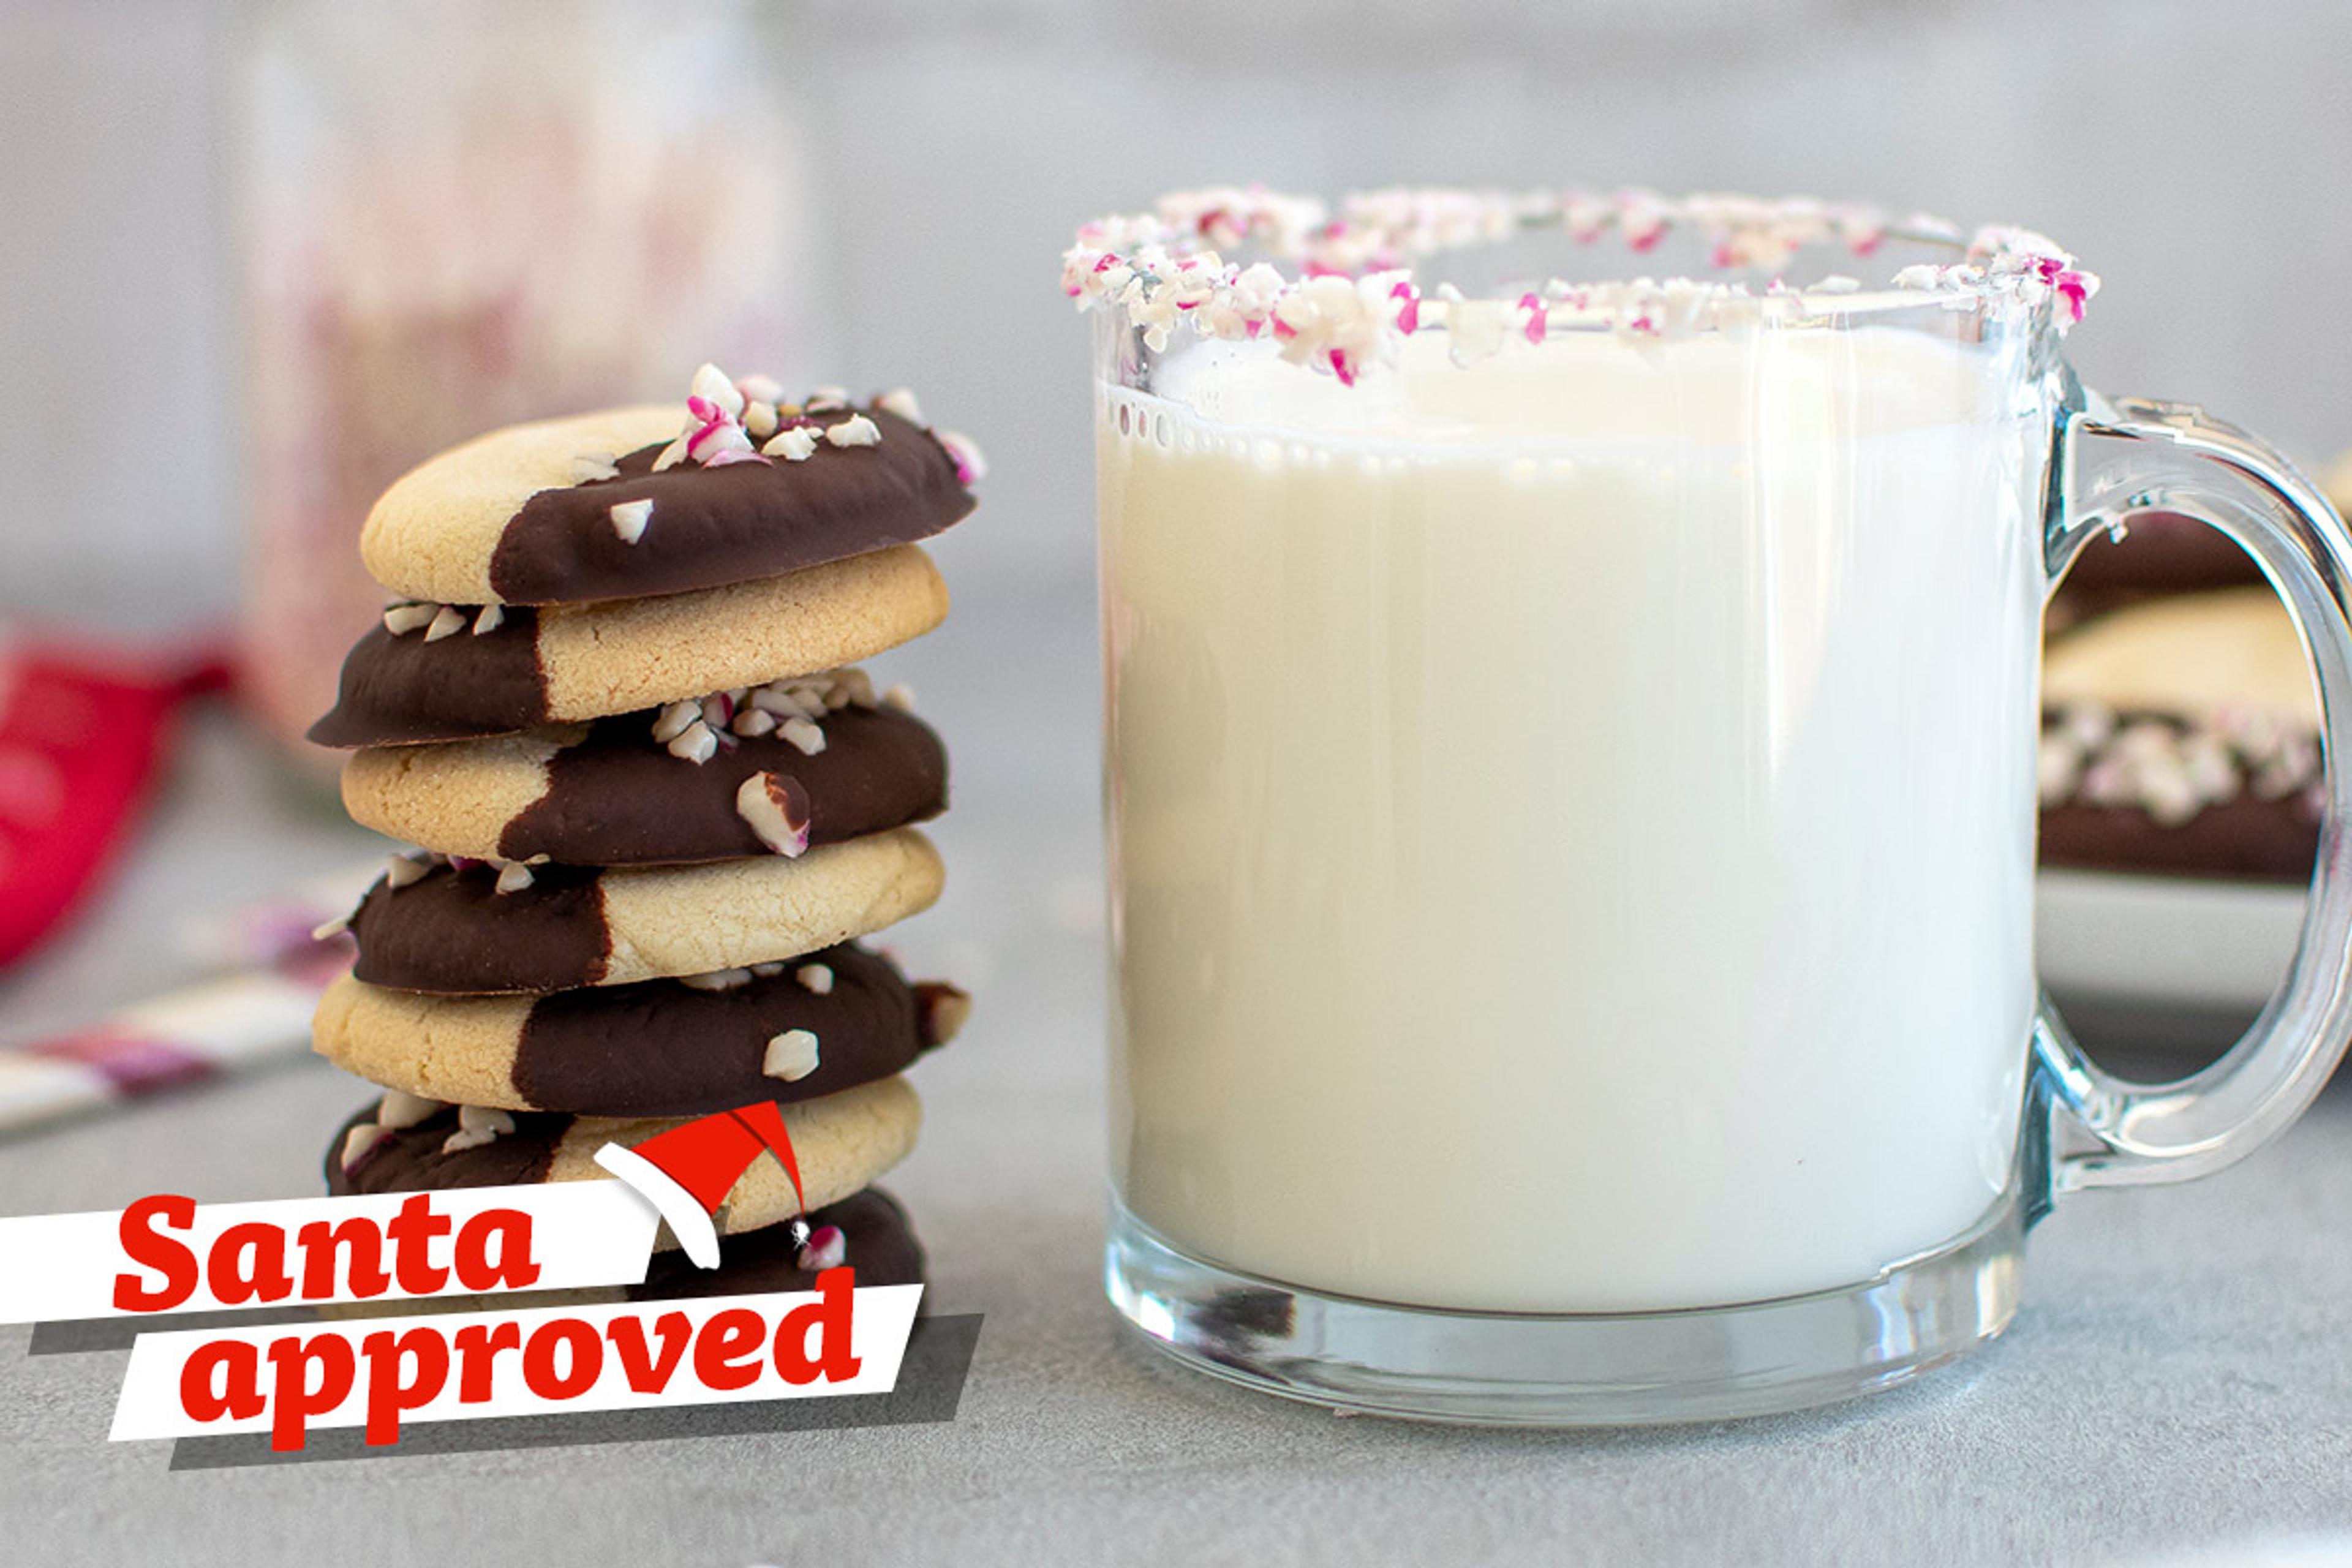 Chocolate-dipped Peppermint Shortbread Cookies with Vanilla Steamed Milk.